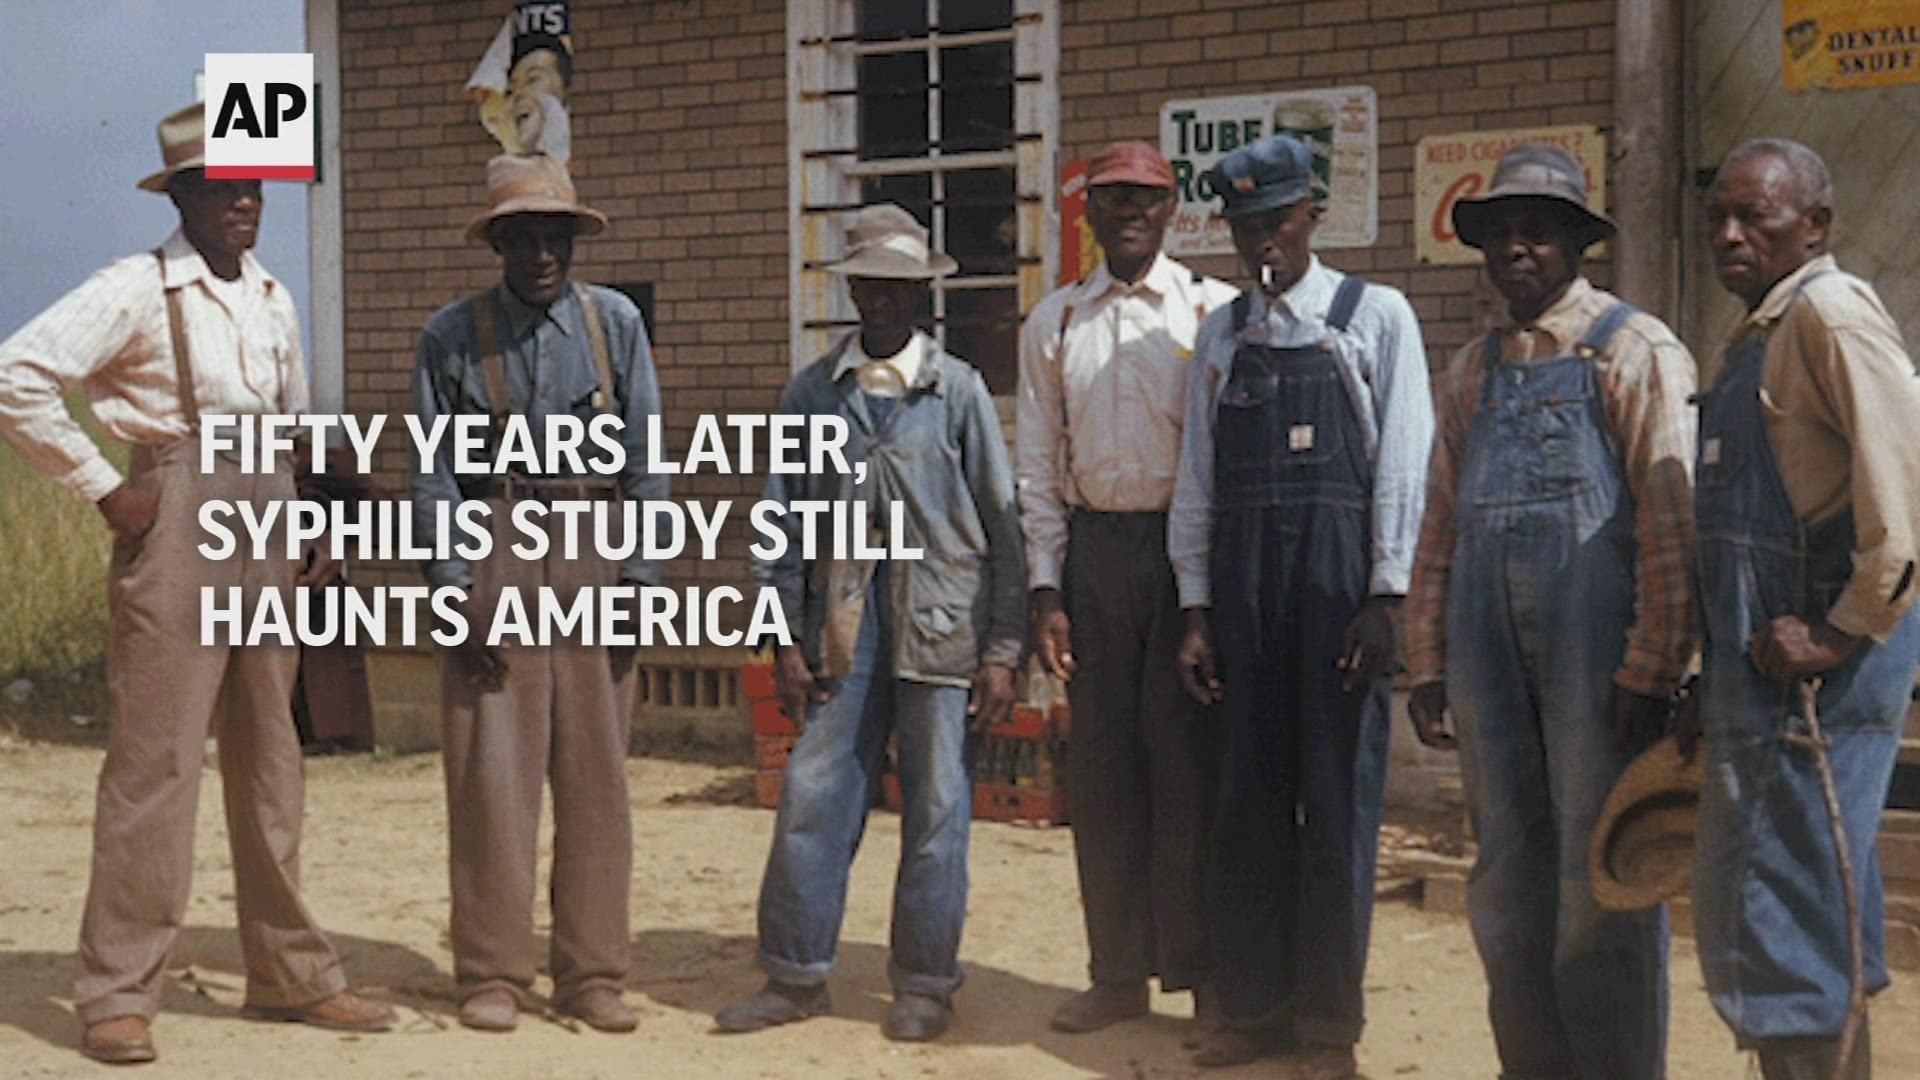 WATCH: In July 1972, a reporter broke the story of the Tuskegee study. The experiment still casts a long shadow over the medical system.